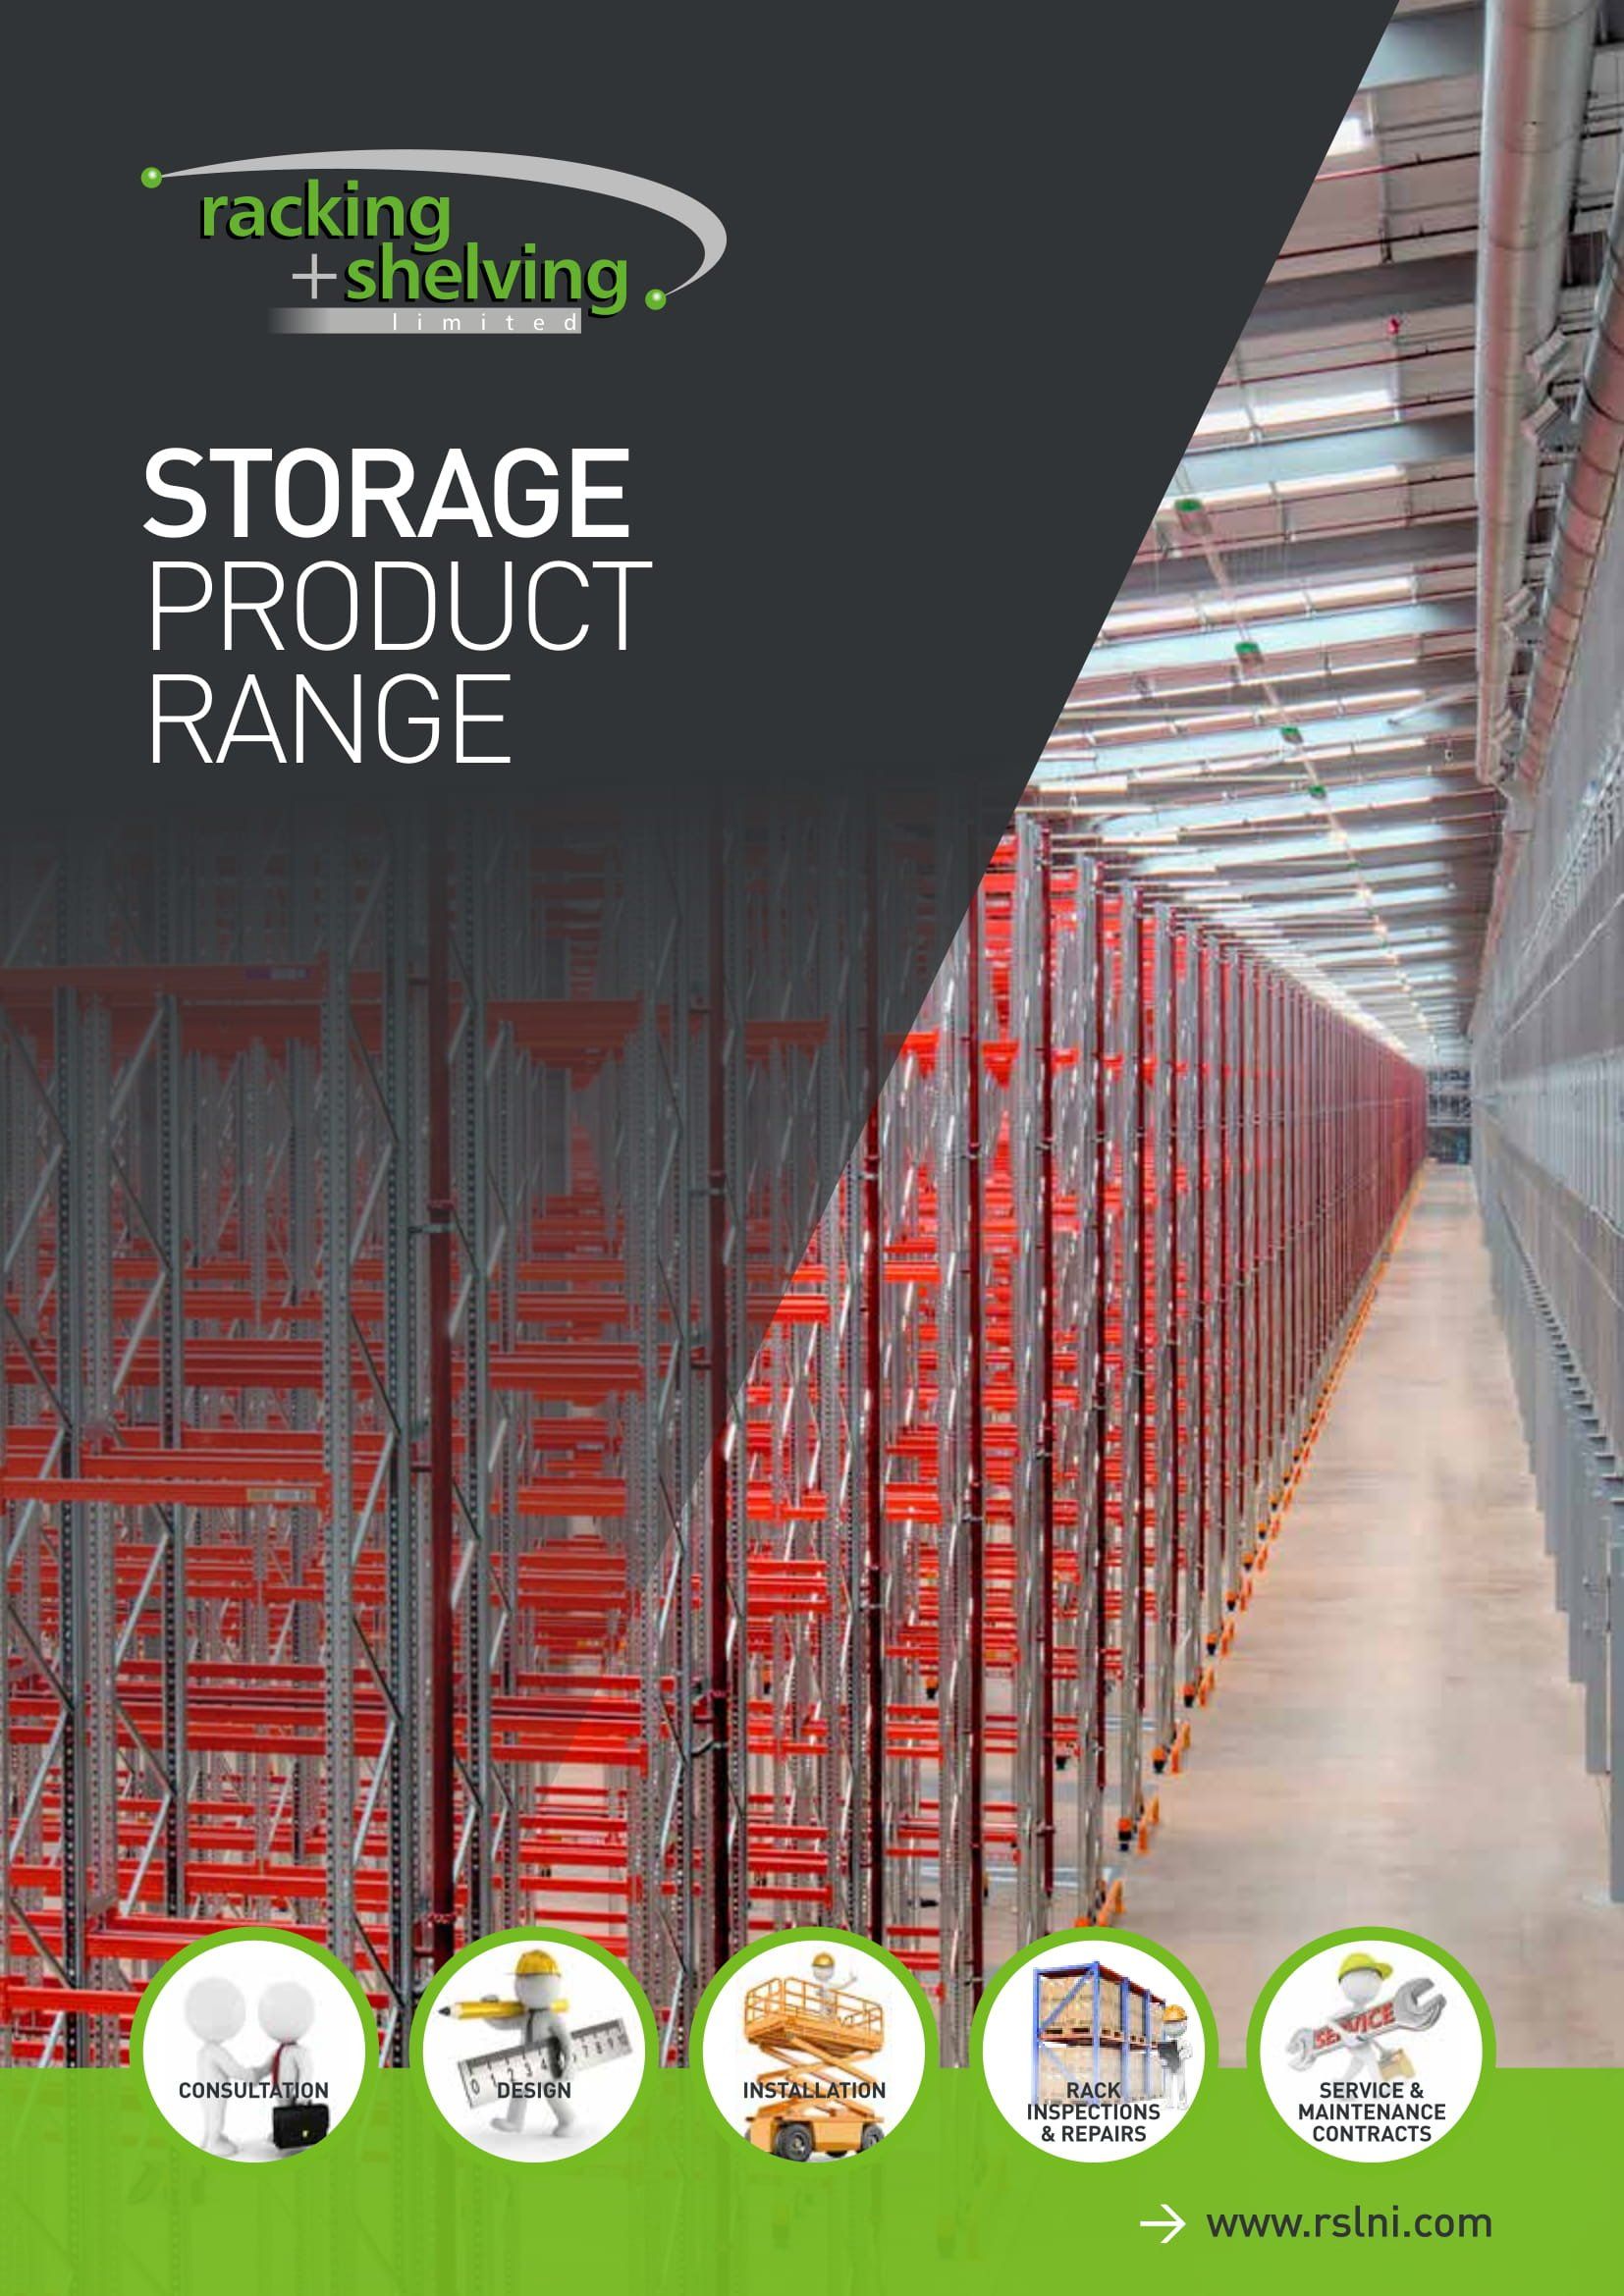 Storage product range brochure front page.